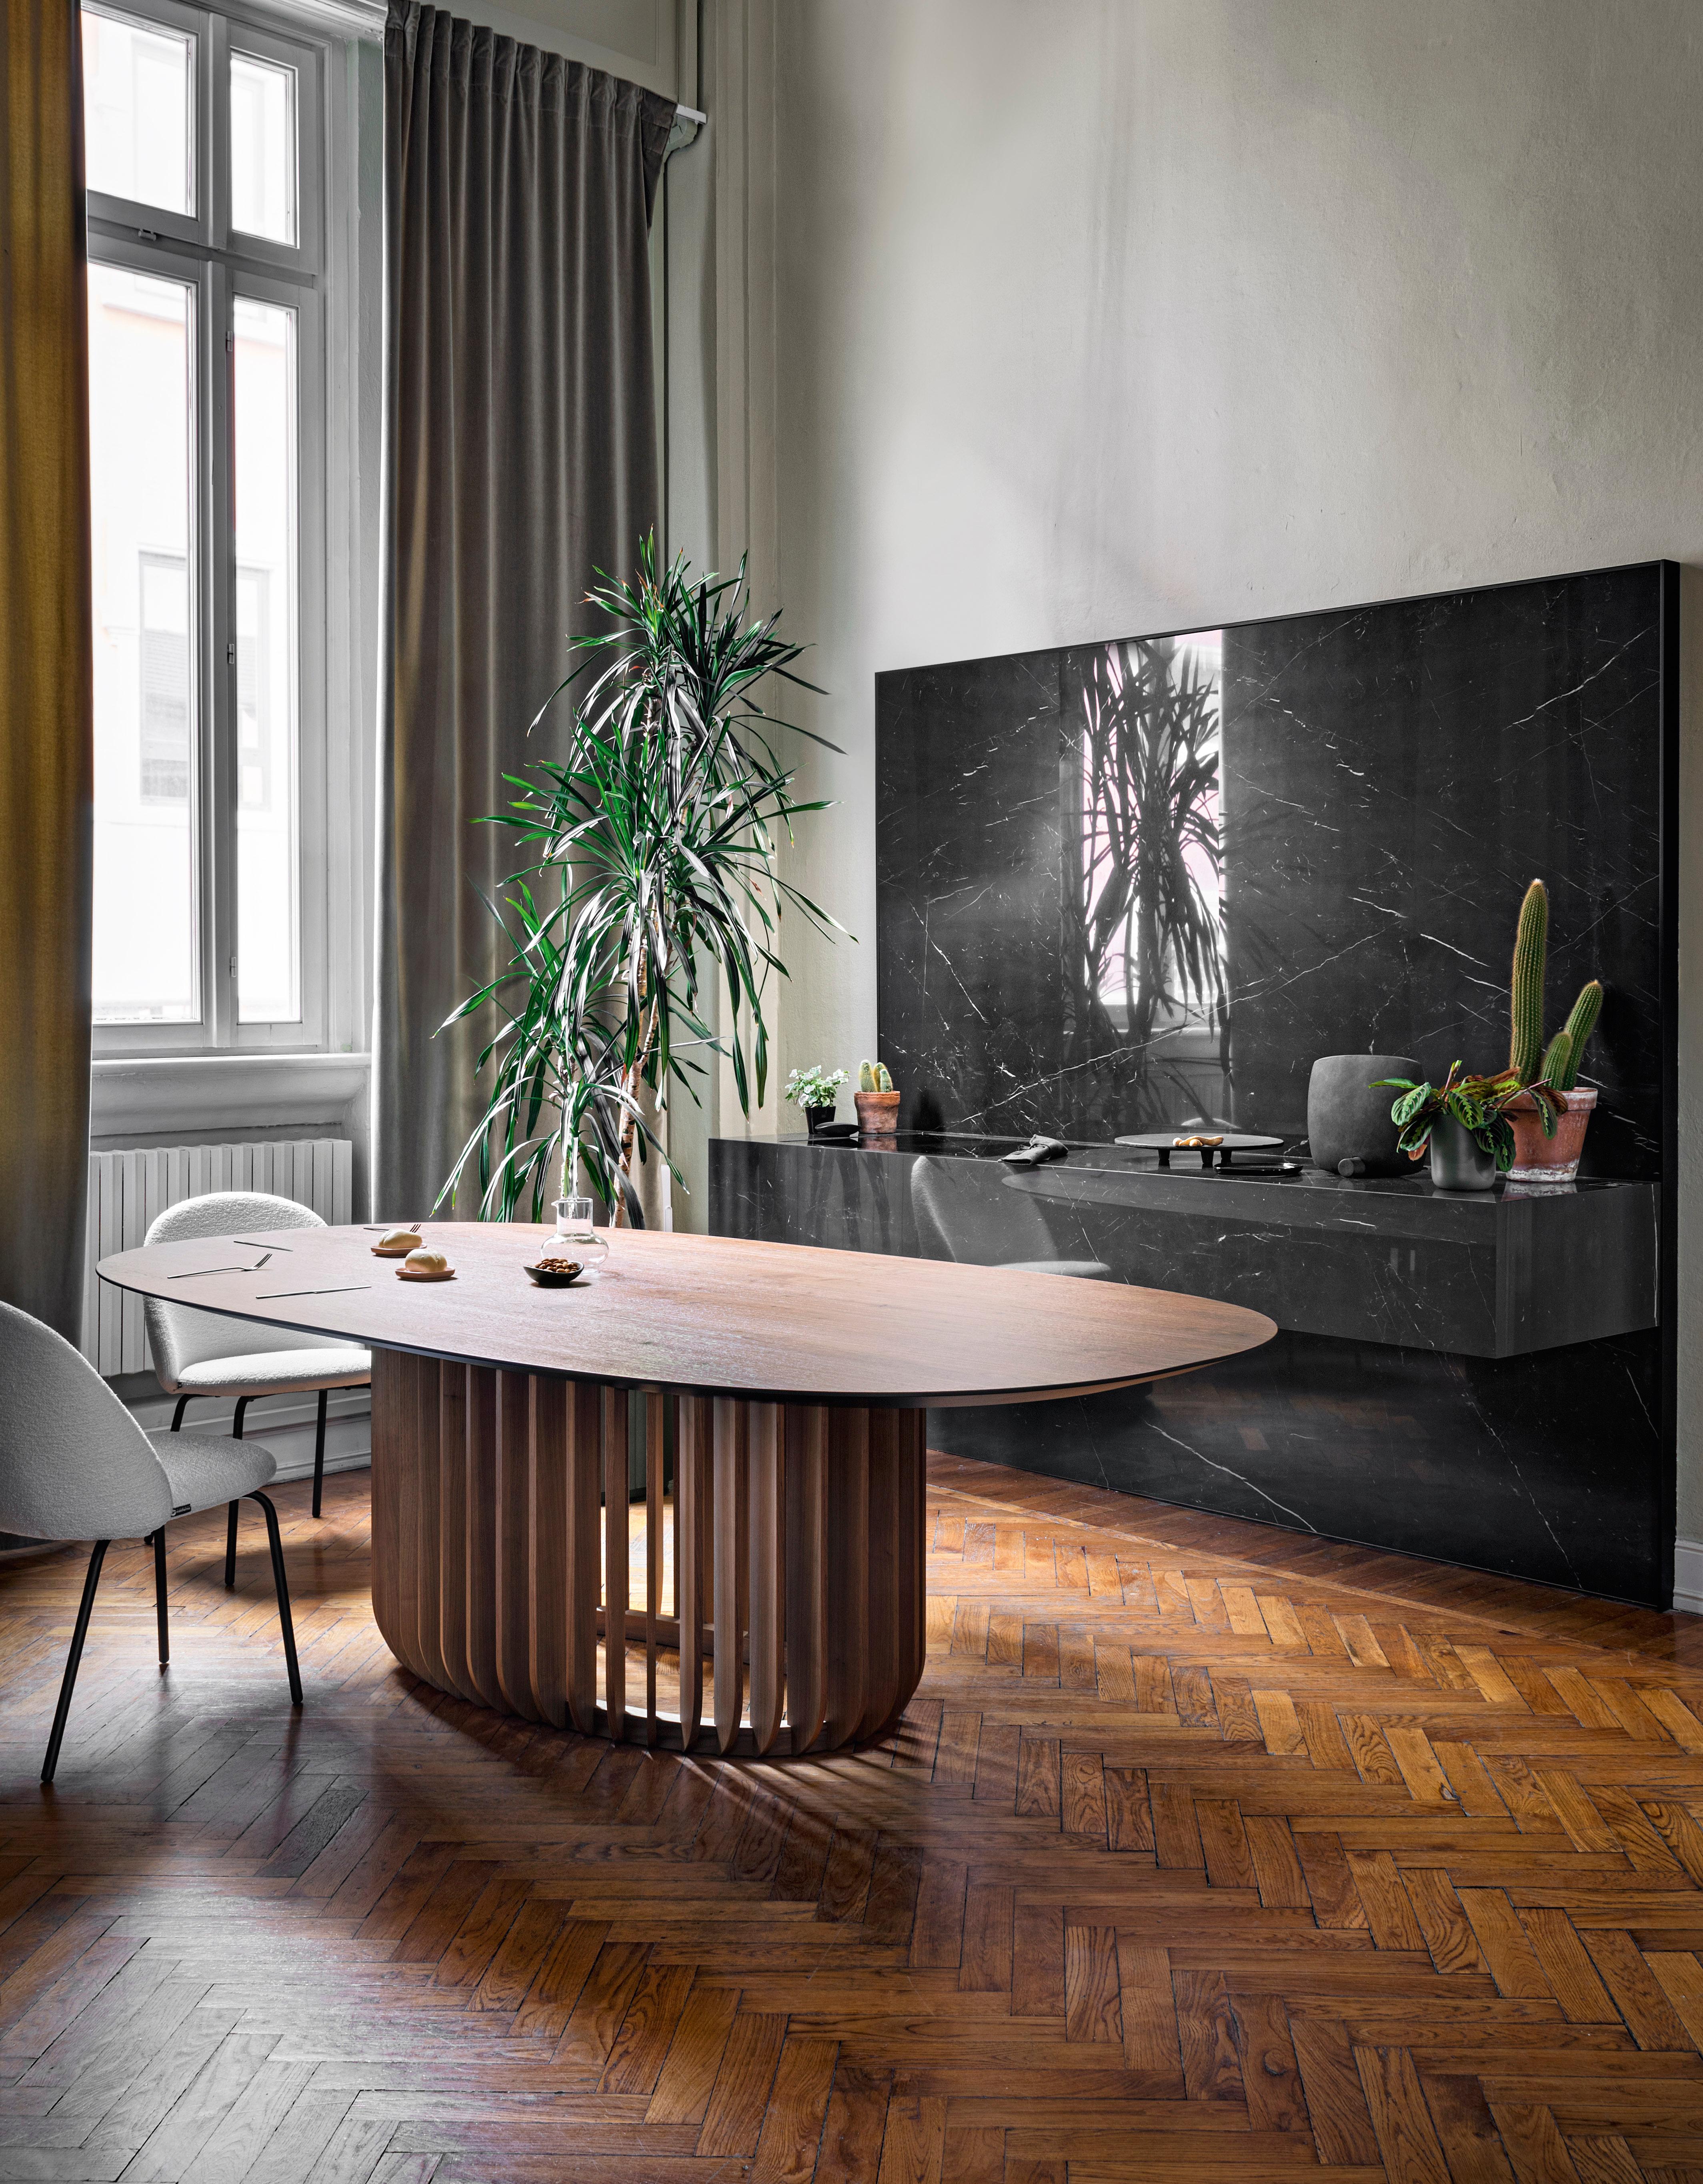 Juice is a monumental table with a meditative air. Its essence lies in the base, where the long wooden legs attach to a ring, encircling it. Juice, a table developed around the balance between filled and empty spaces, creates a sensation of perfect